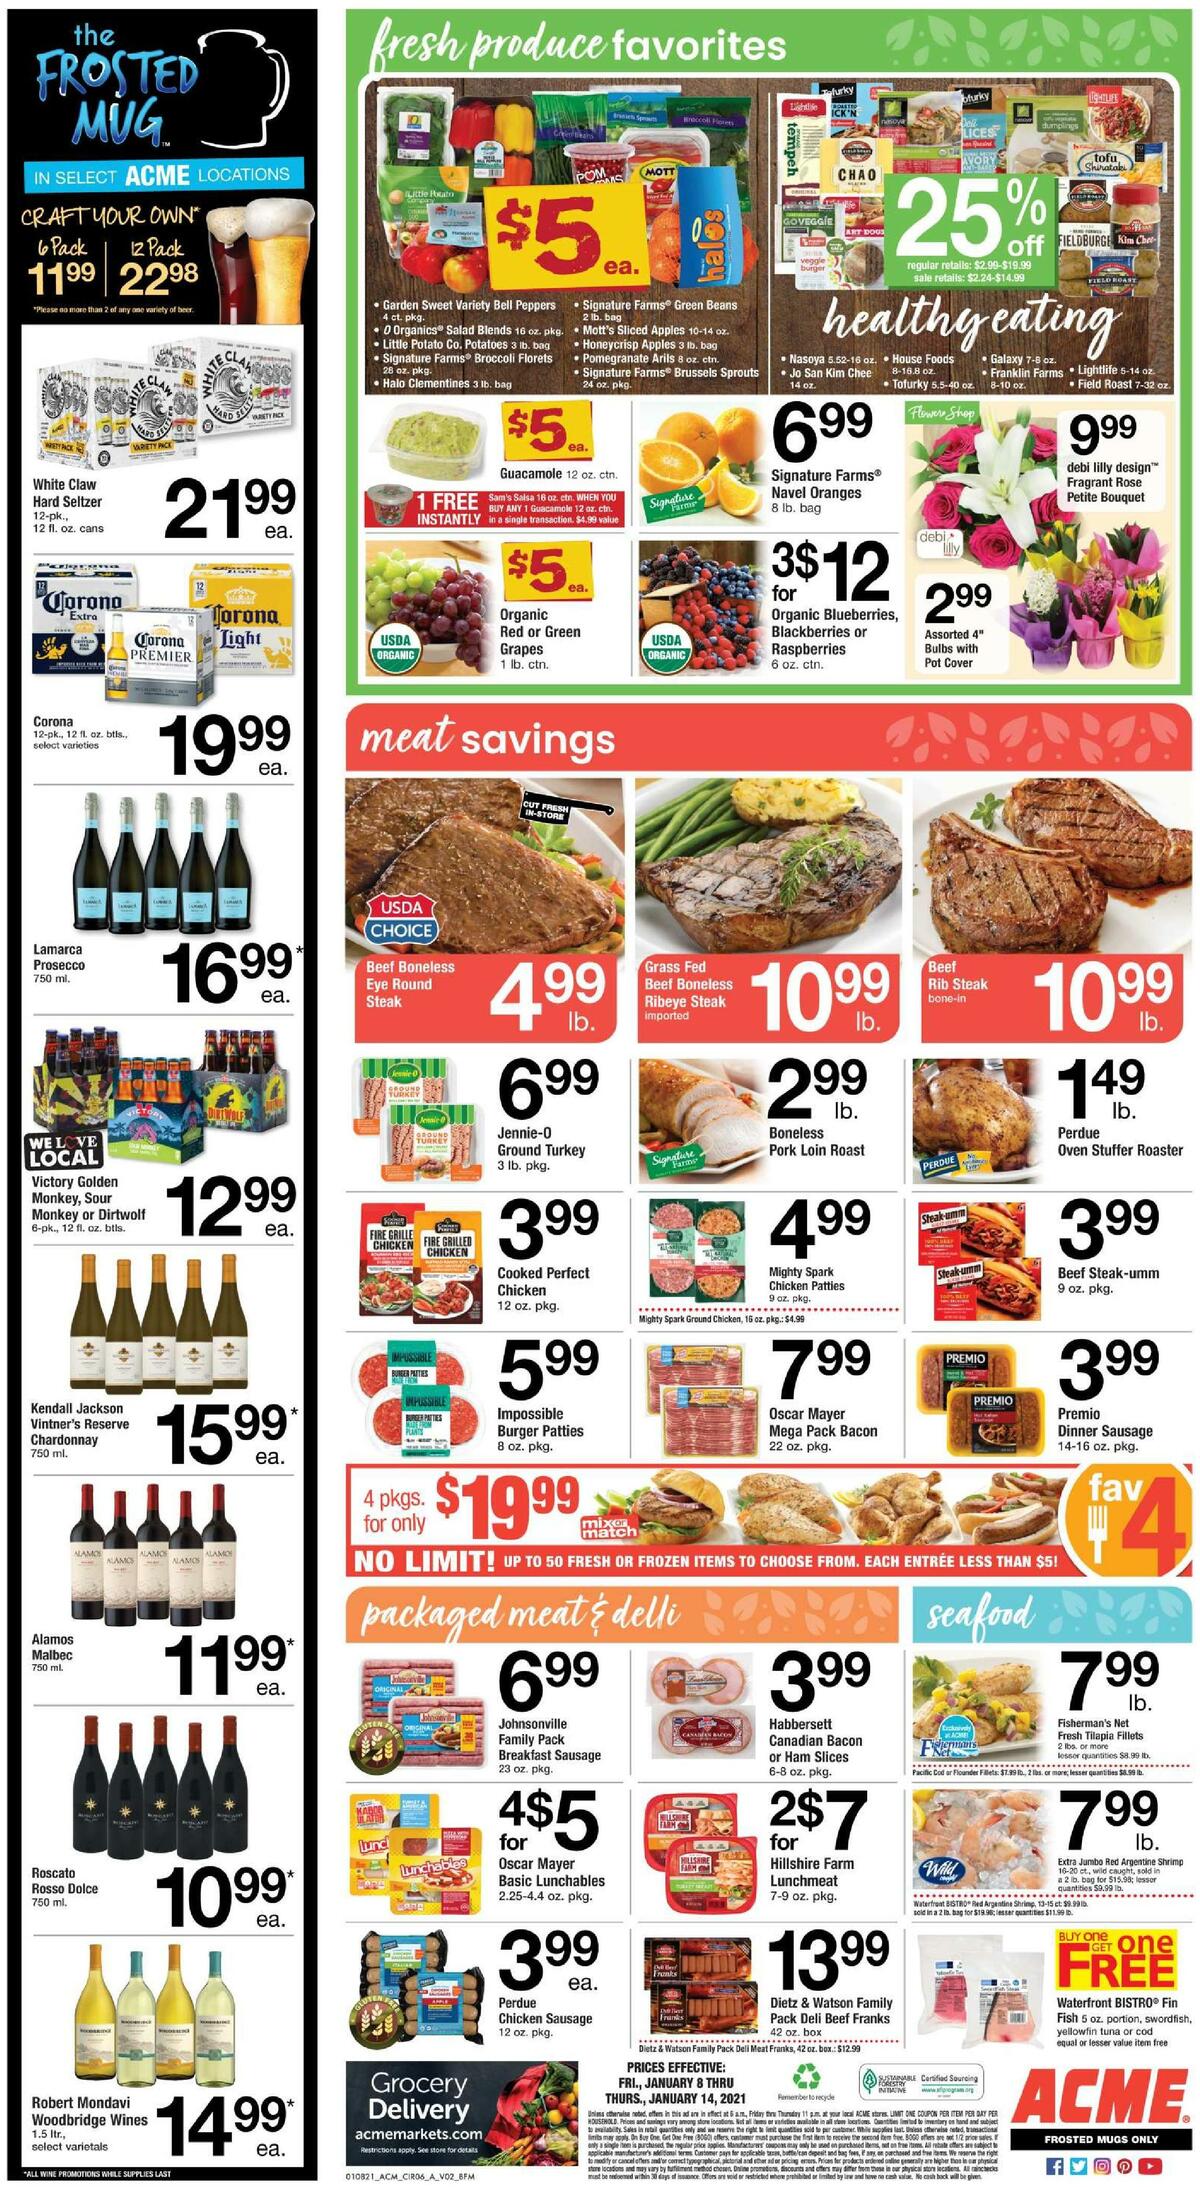 ACME Markets Weekly Ad from January 8